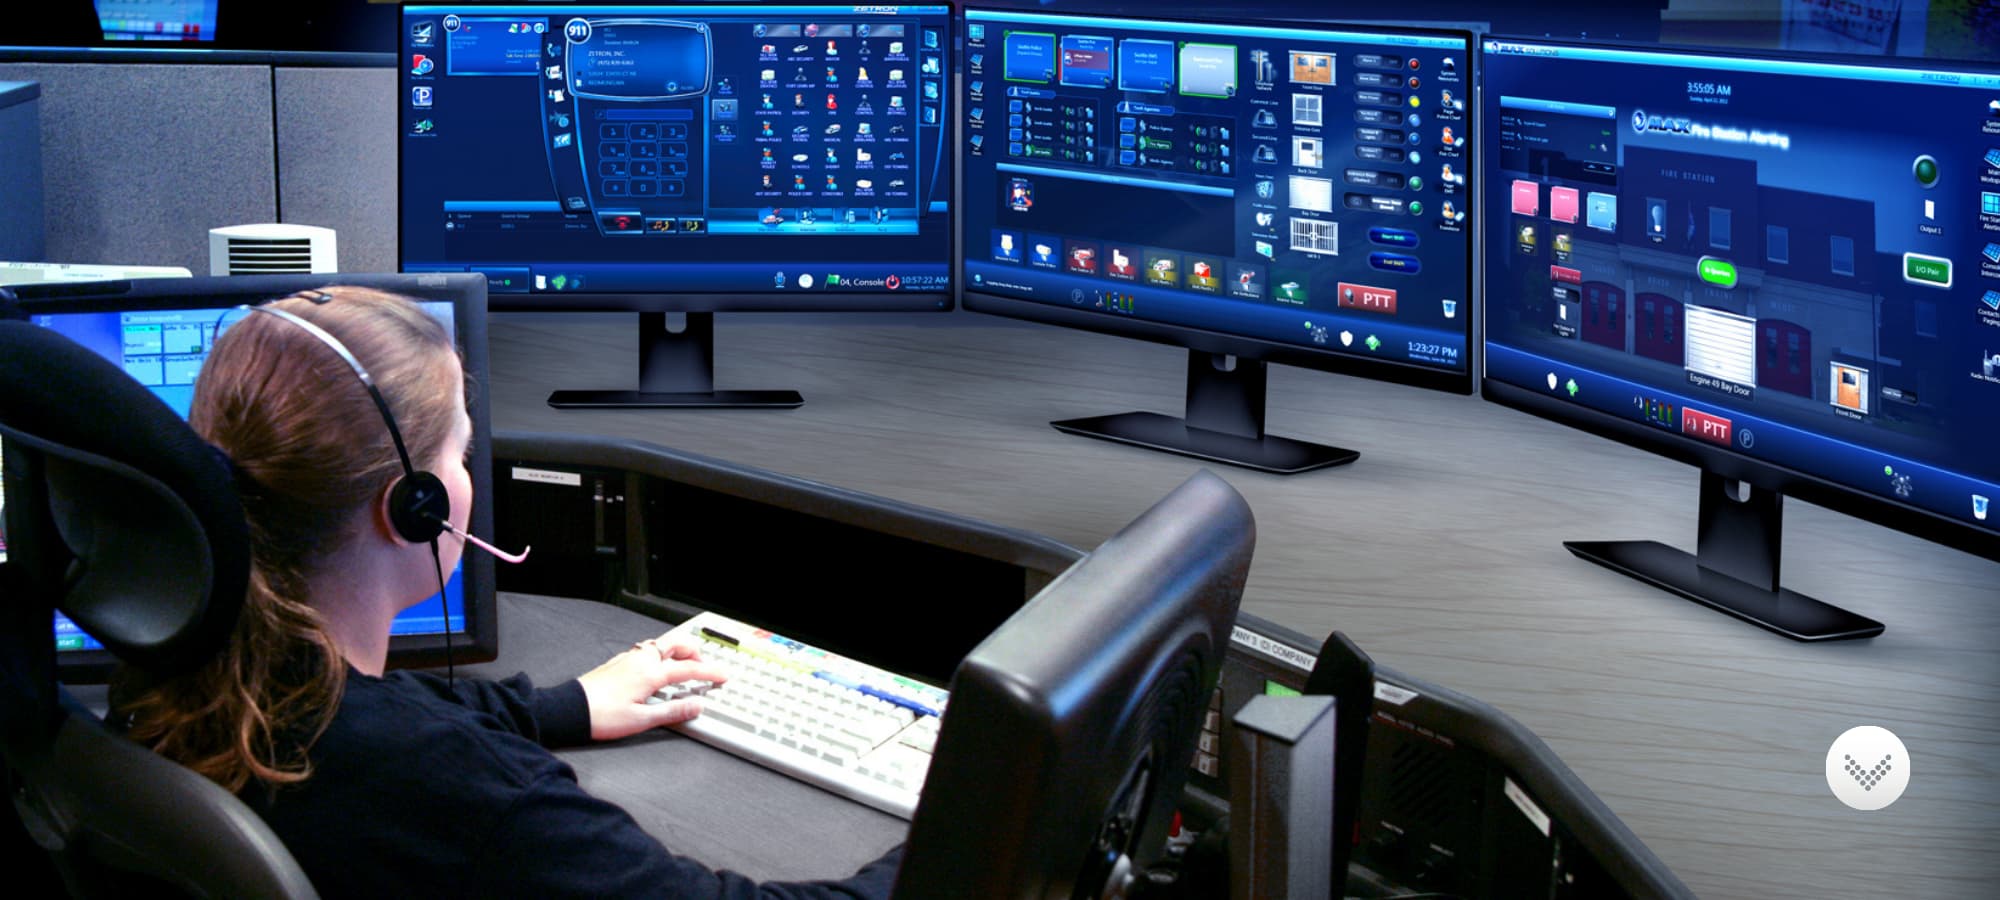 Women sitting at dispatch position in front of several zetron monitors.